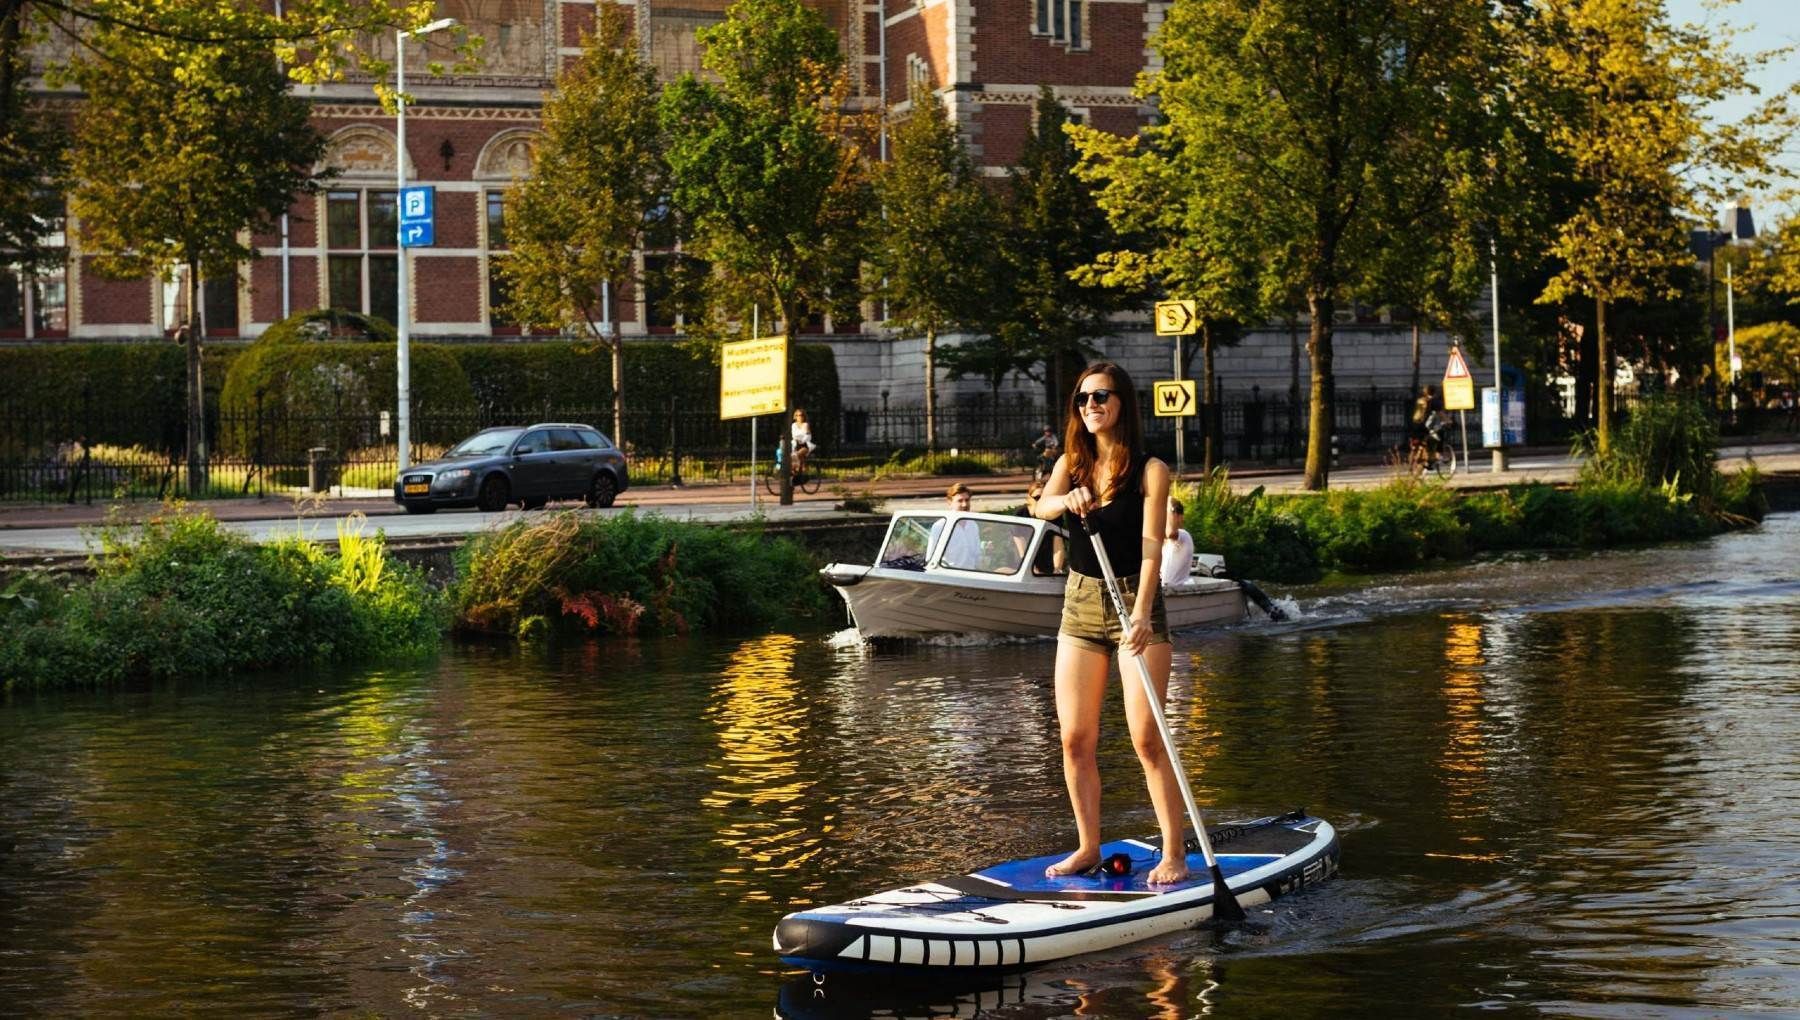 maag atomair pin Best outdoor sports to try in Amsterdam | I amsterdam